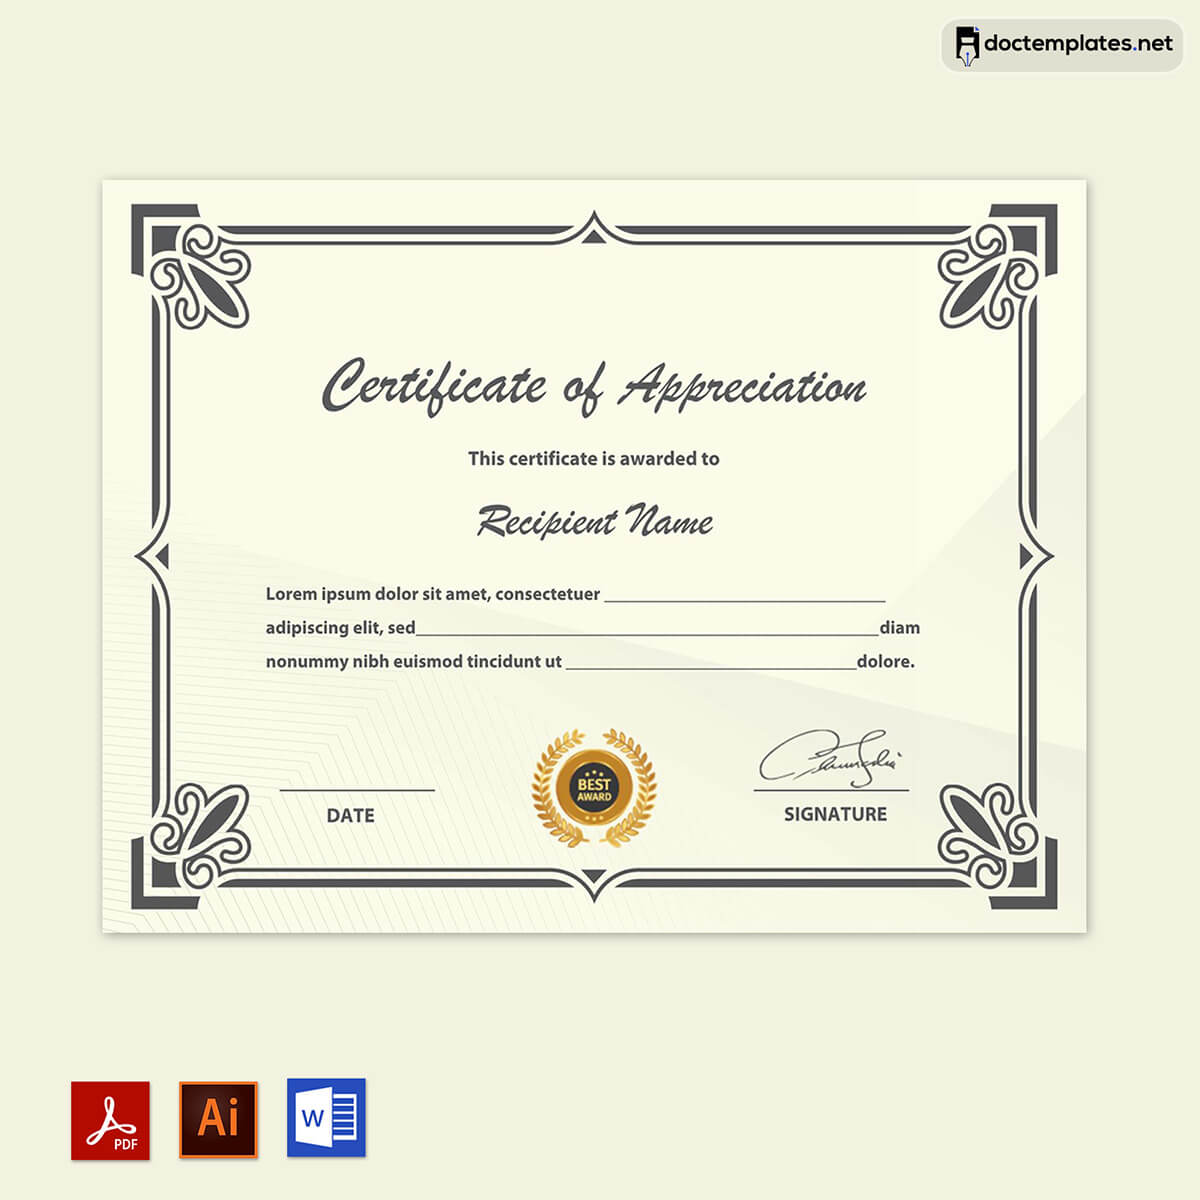 Image of Appreciation certificate for employees
Appreciation certificate for employees
